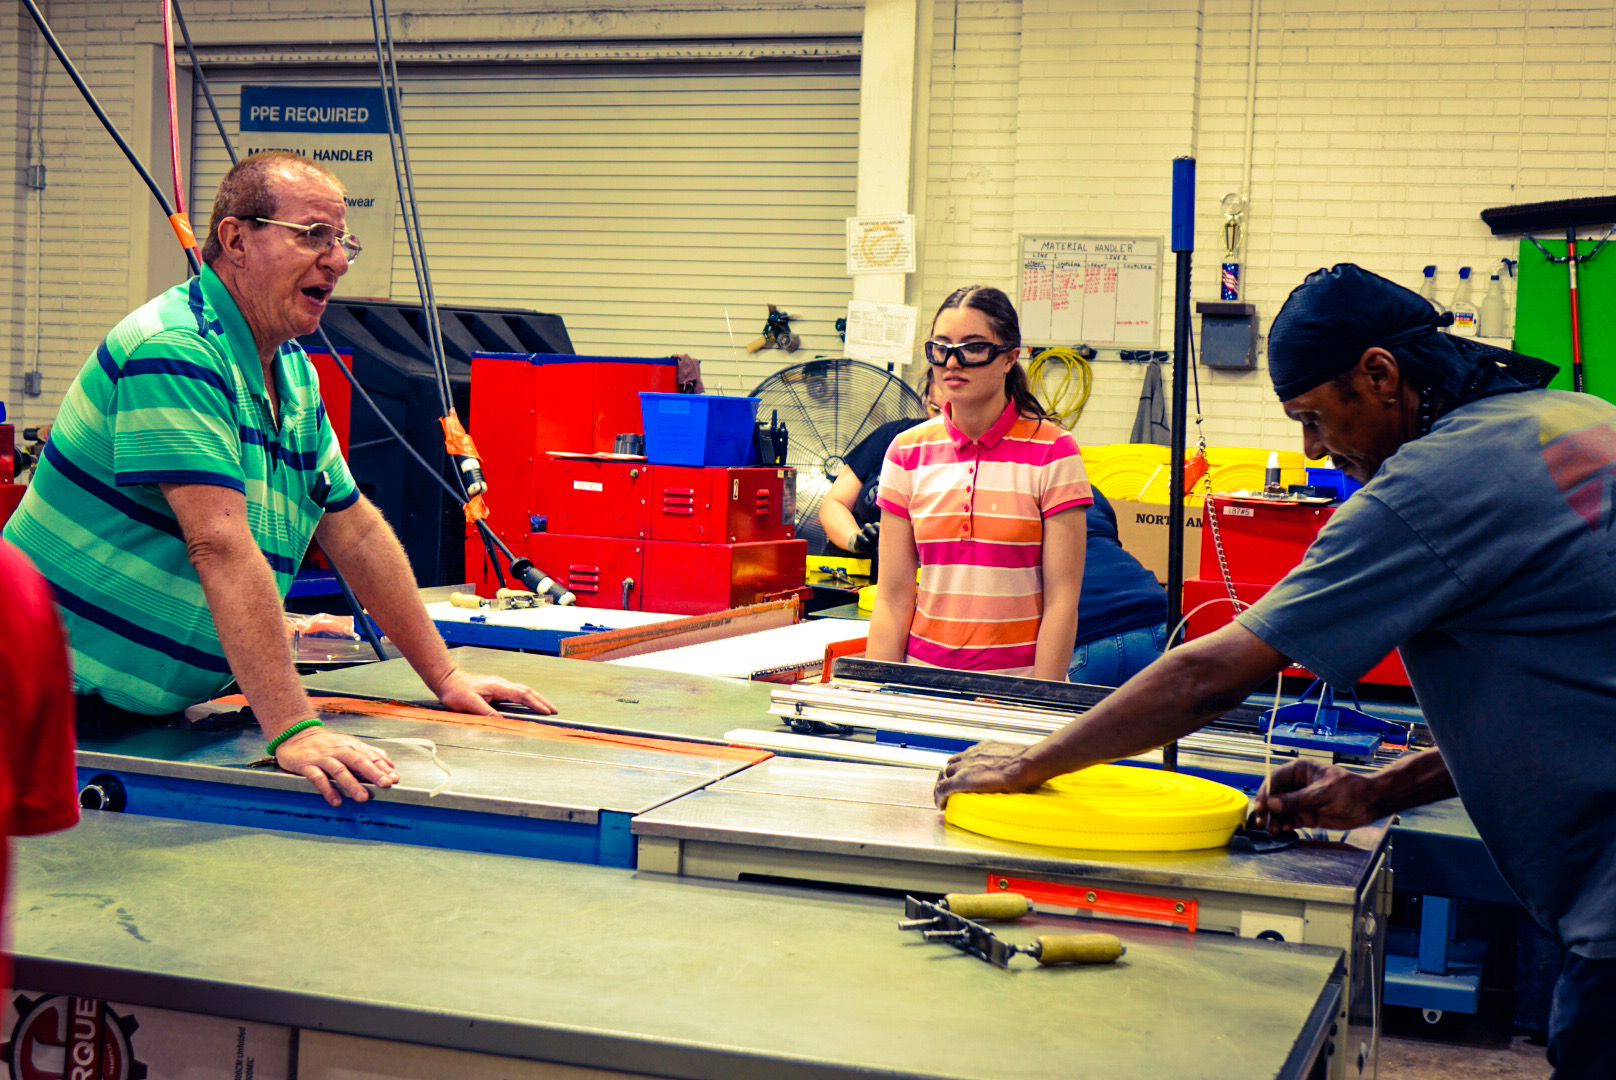 NewView employees are seen manufacturing yellow fire hoses for the US Forest Service.